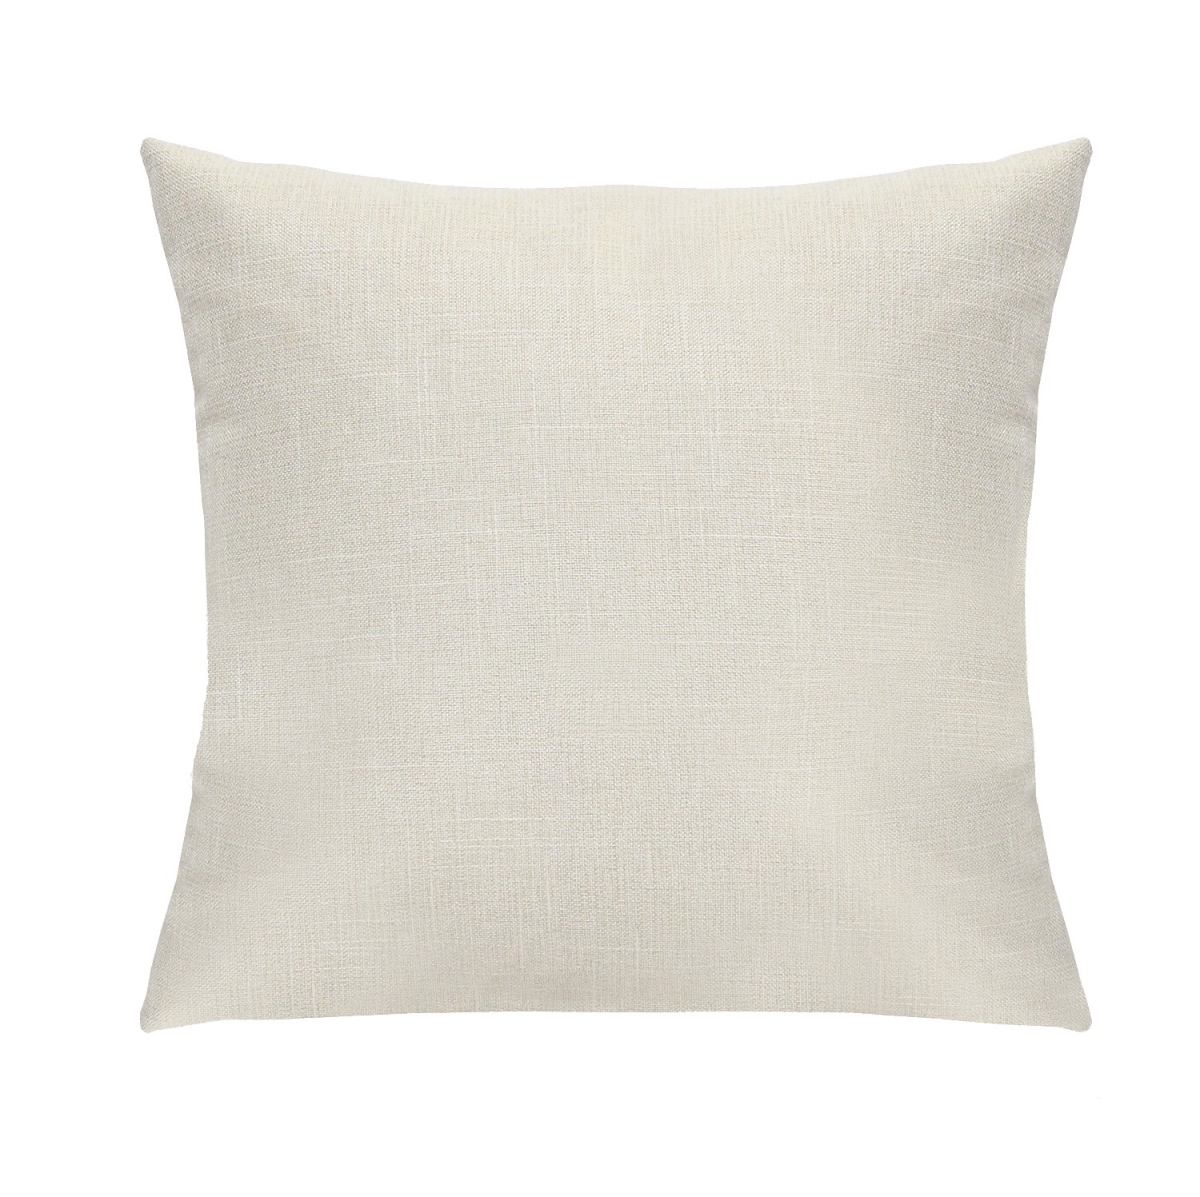 Home Roots Beddings 329329 Tweed Pillow, White